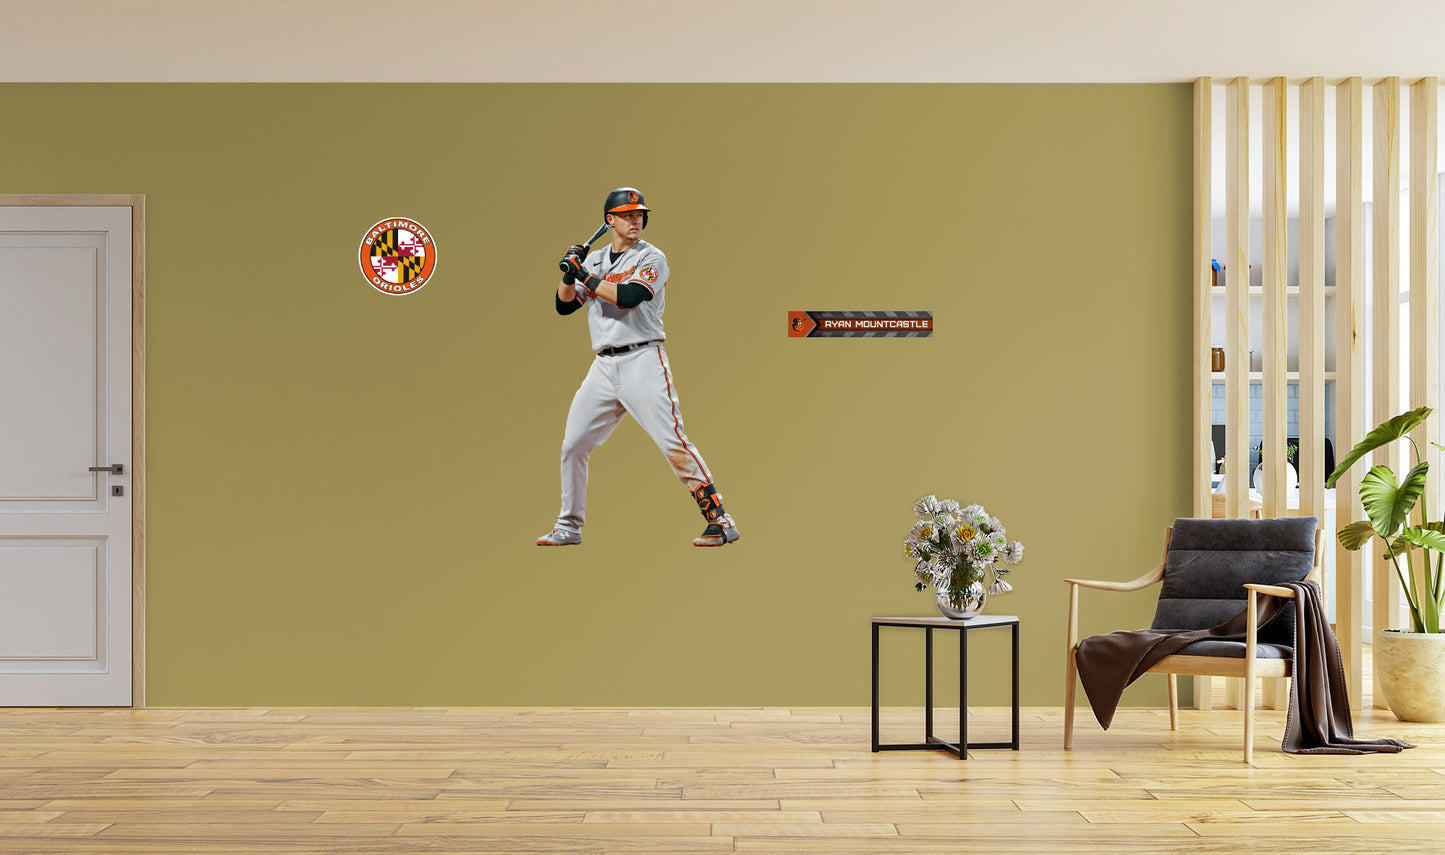 Baltimore Orioles: Ryan Mountcastle - Officially Licensed MLB Removable Adhesive Decal